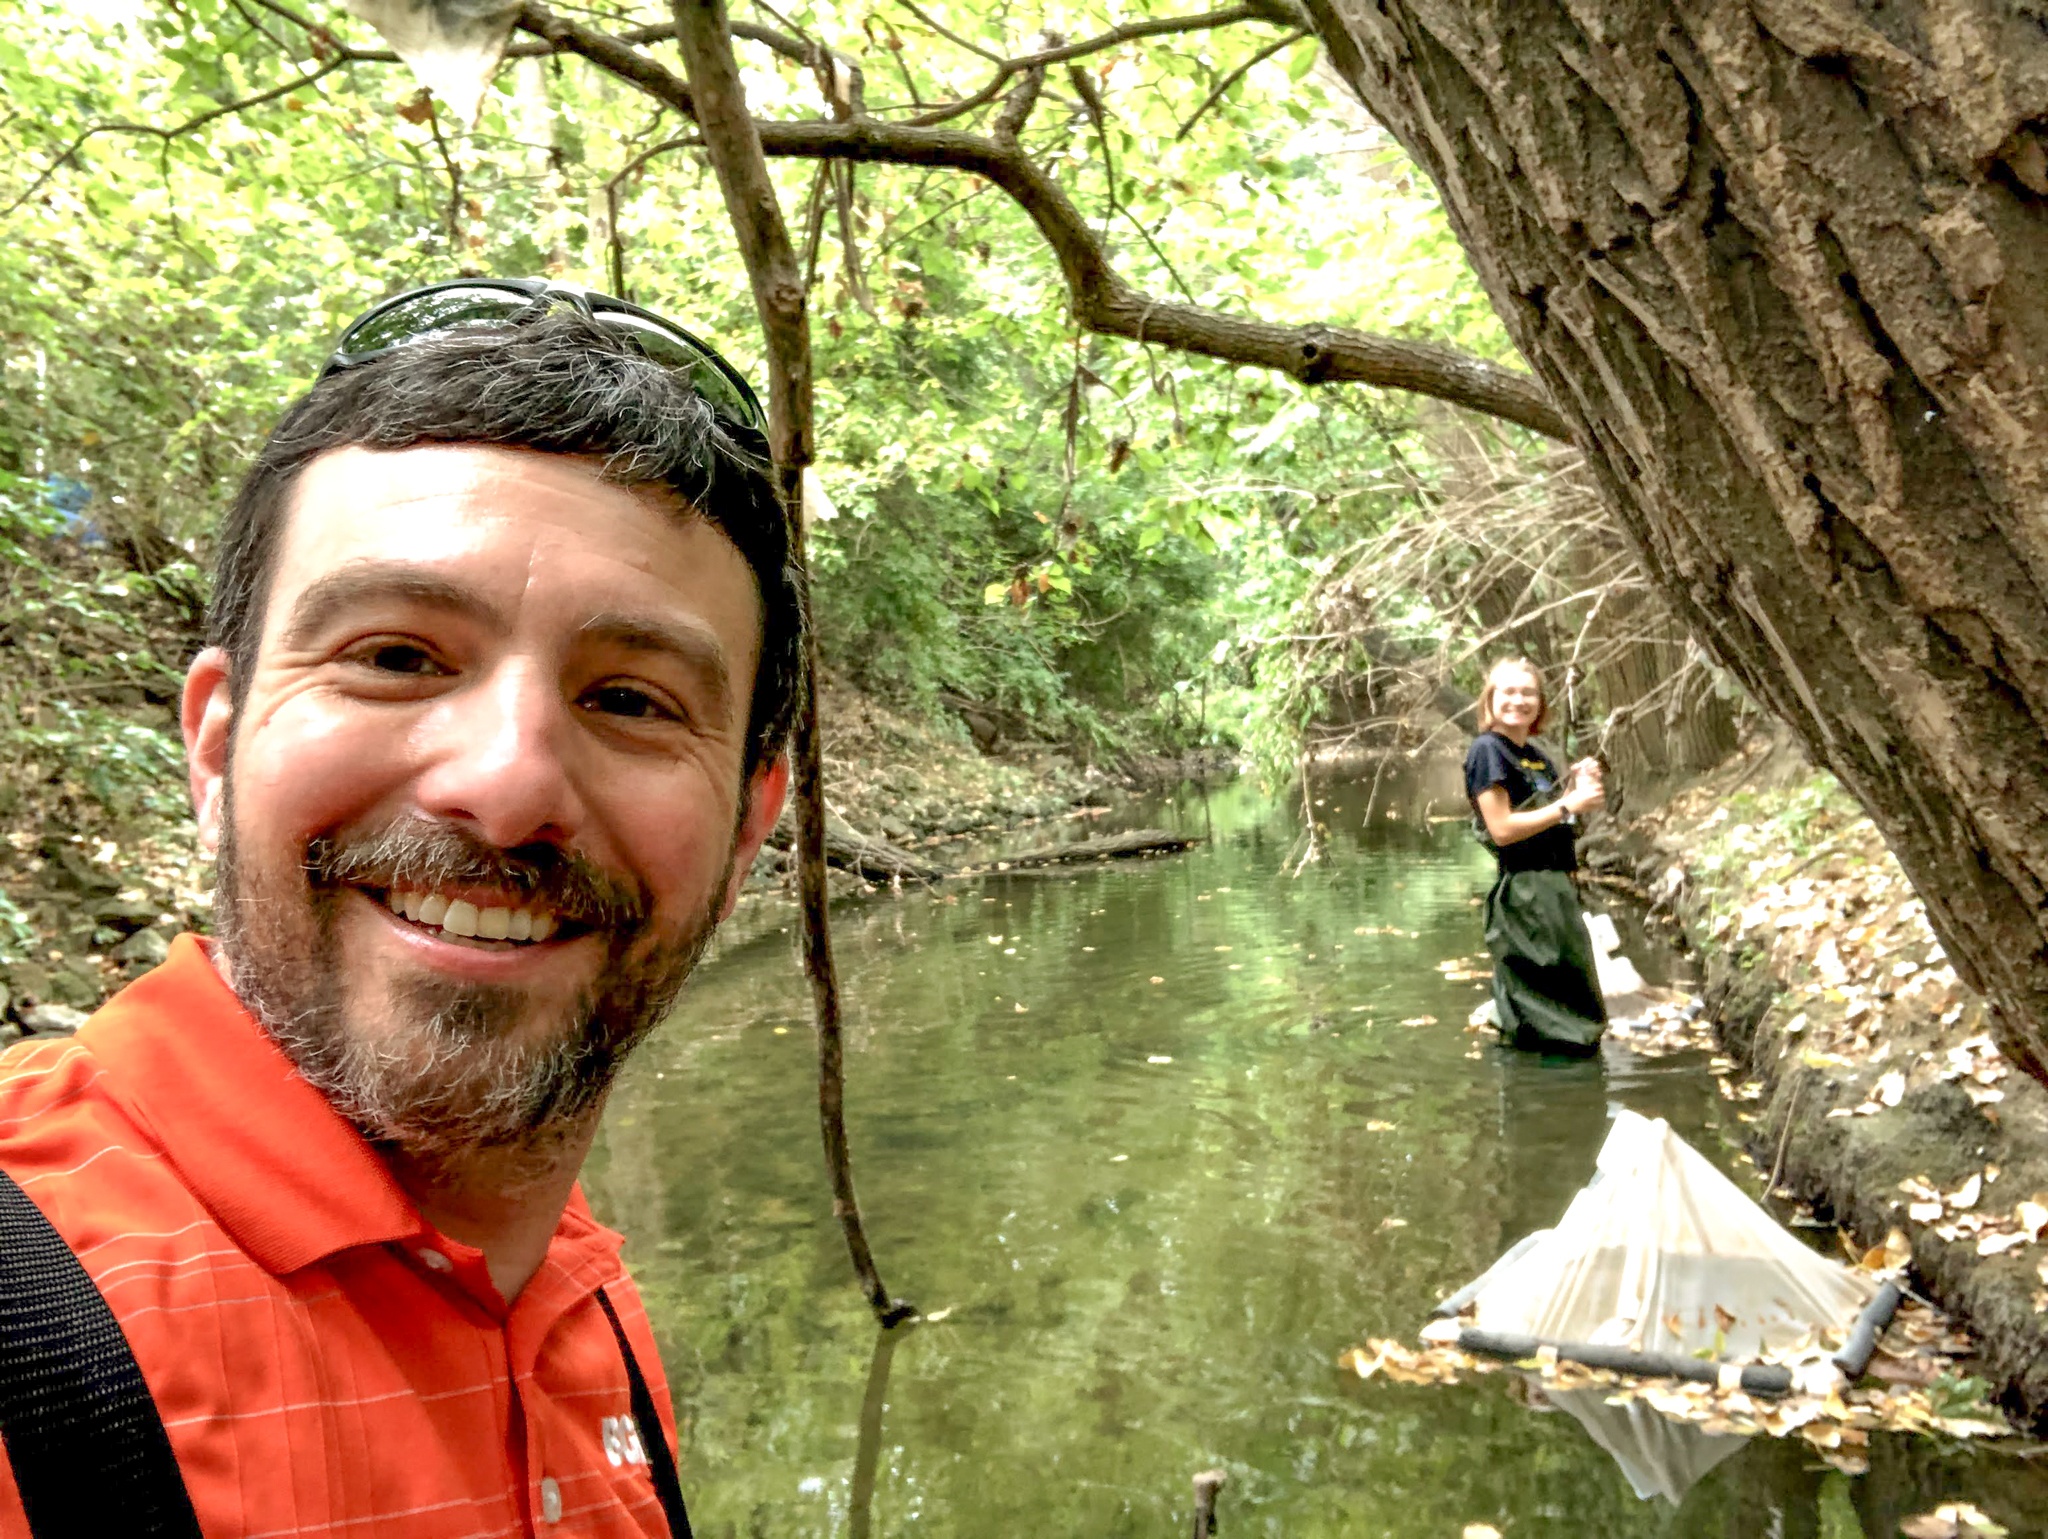 A person takes a selfie while standing in a stream.